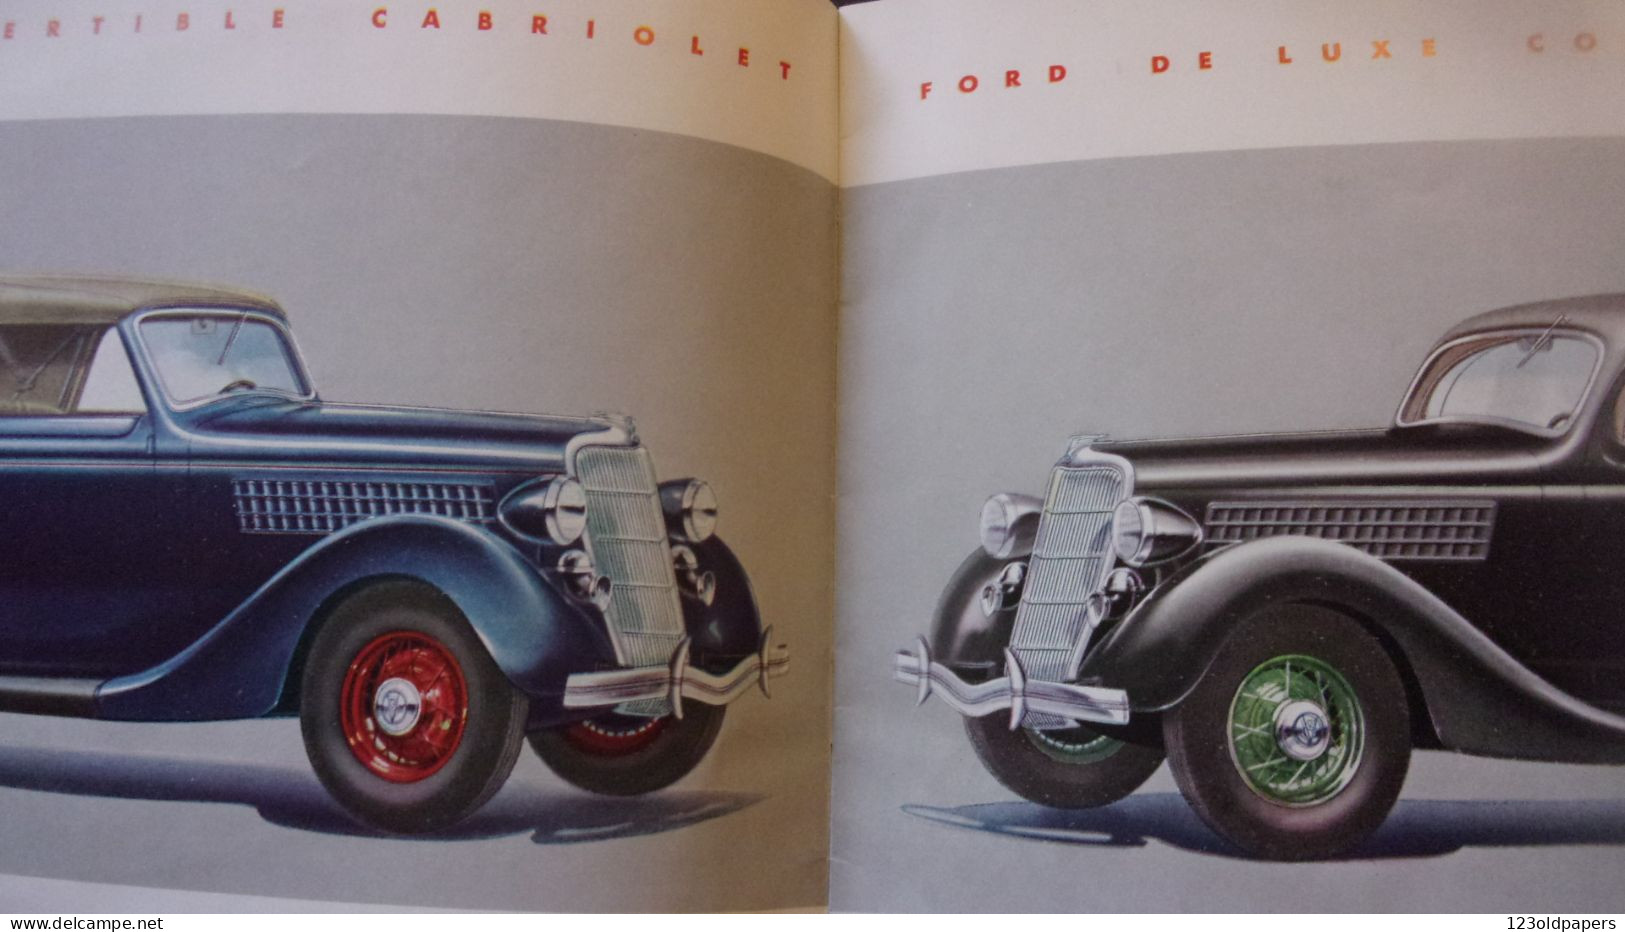 1935 FORD PUBLICITE CATALOGUE FORD V8  FOR 1935 SEDAN COUPE DE LUXE PHAETON ROADSTER FORD MOTOR COMPANY - Automobili